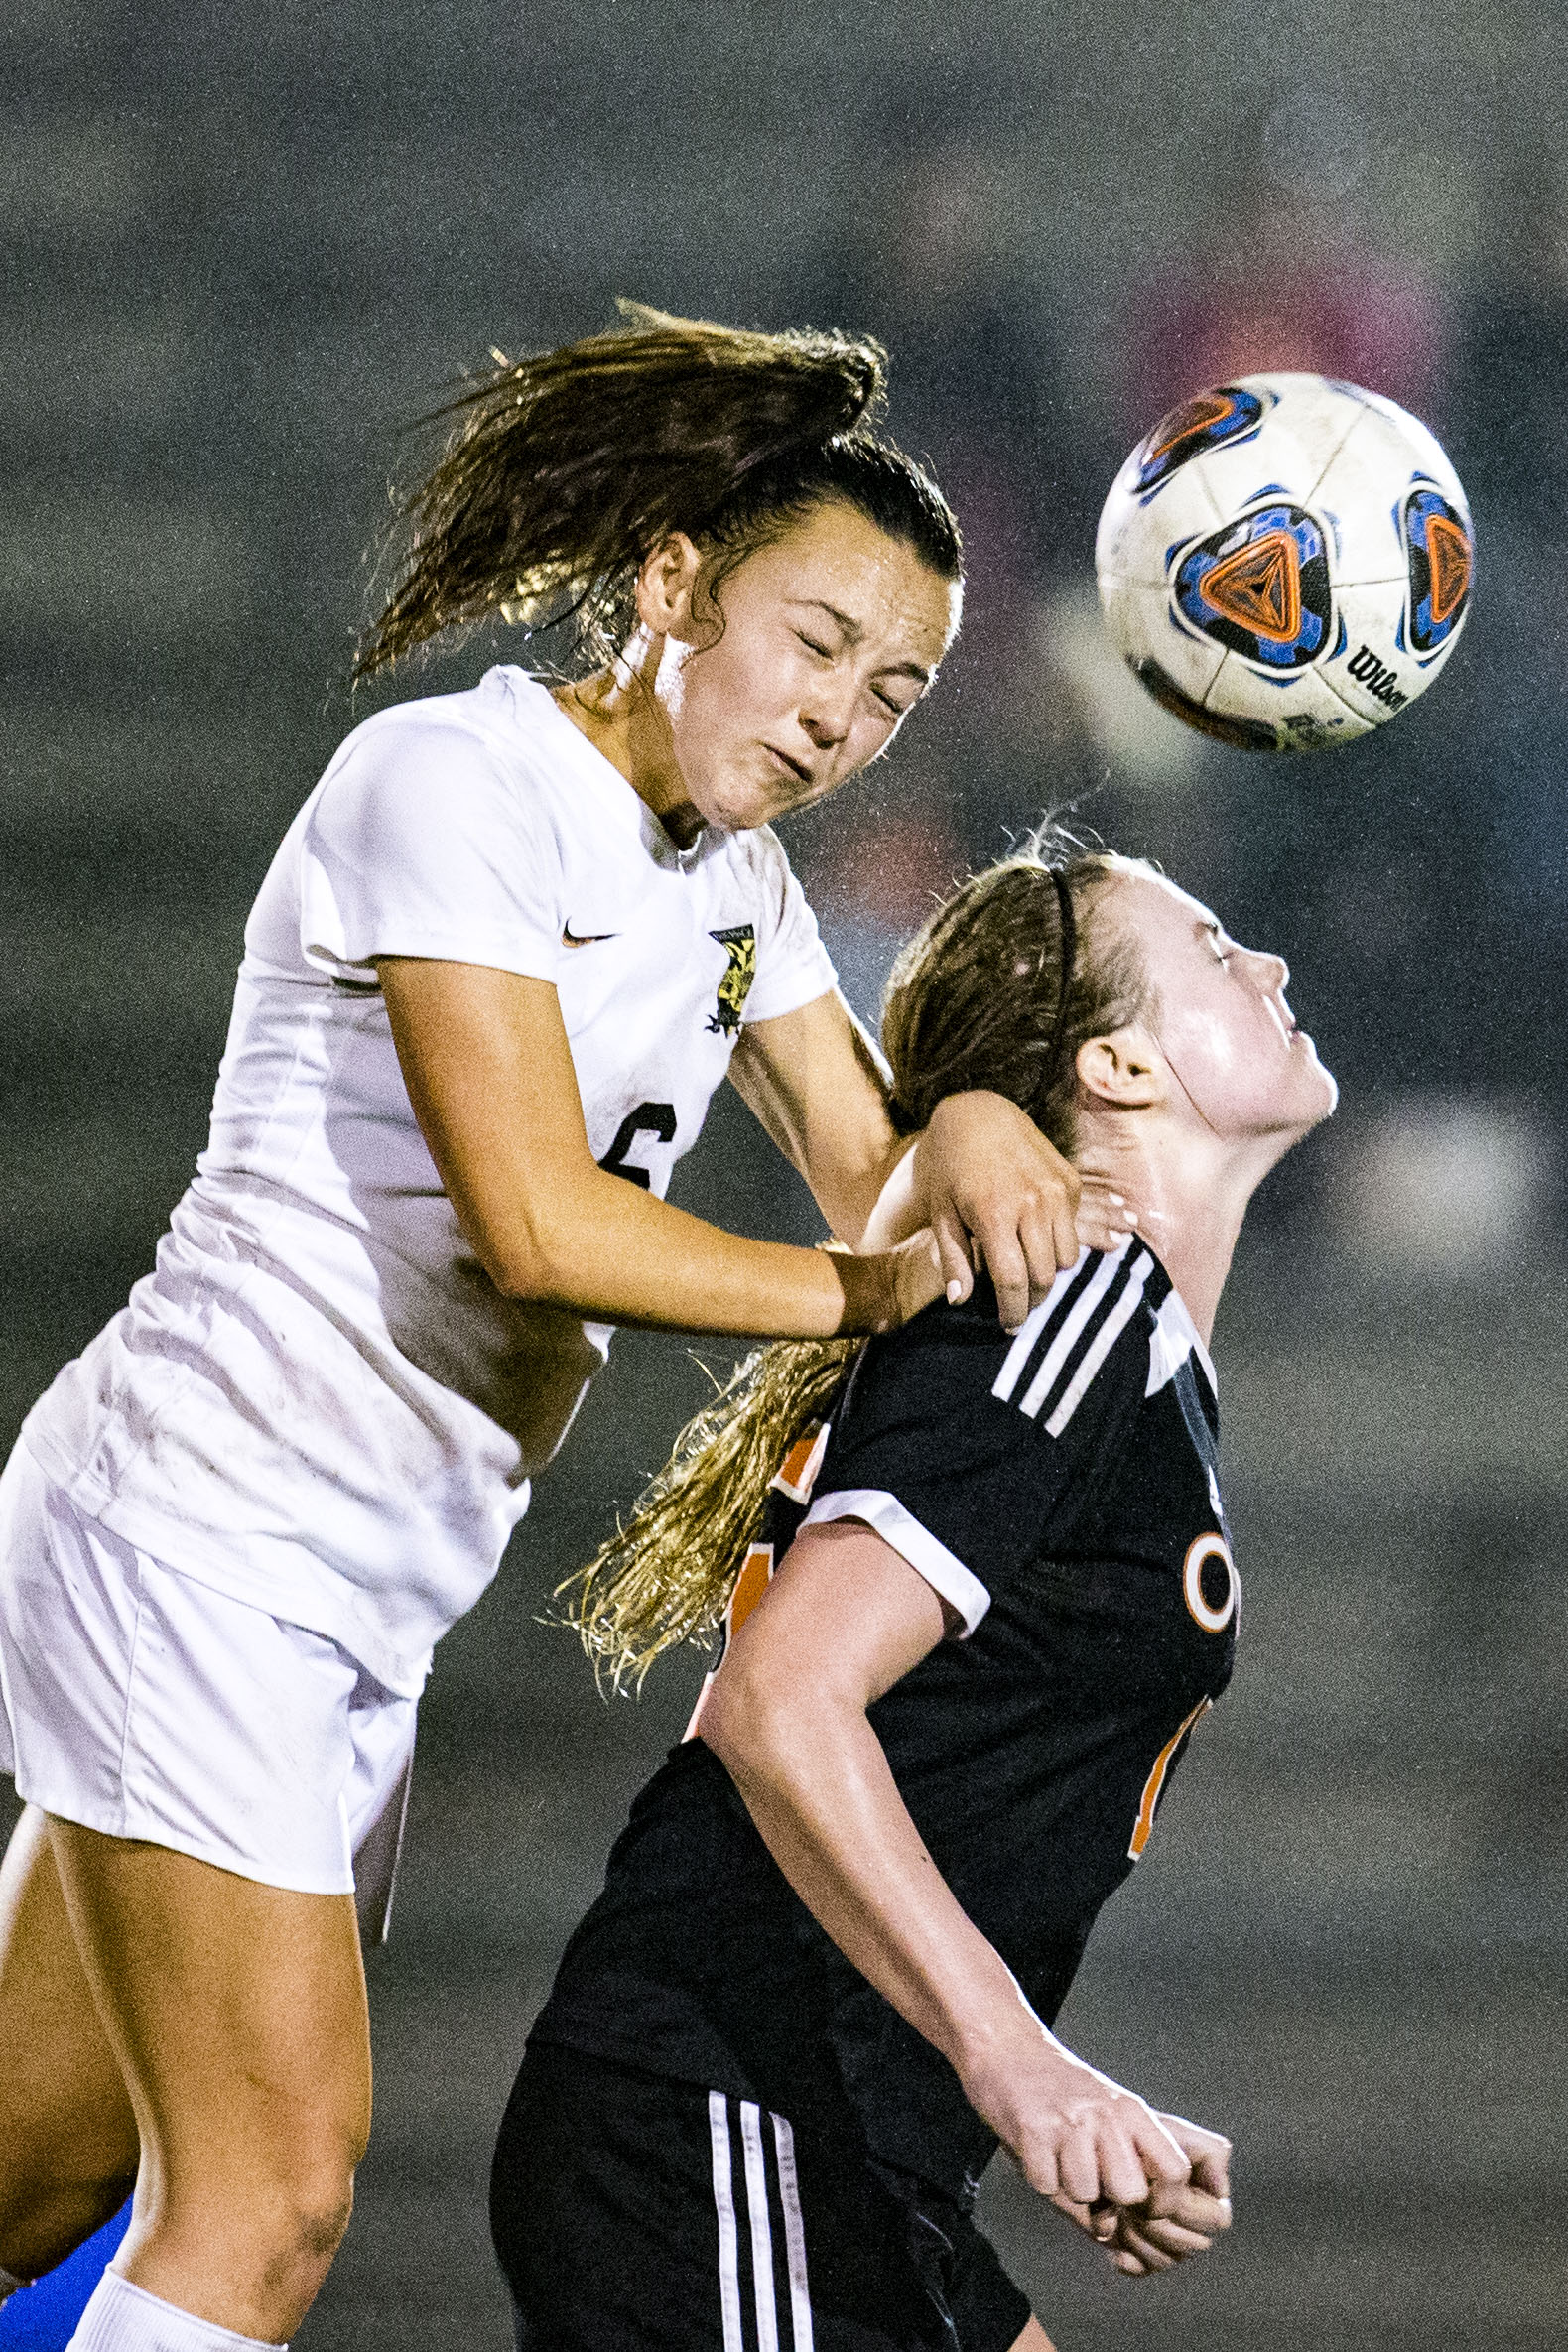  Buchholz's Natalie Johnson pushes off of an Oviedo player to head the ball during the match at Citizens Field on February 13, 2018. Buchholz High lost 0-2 to Oviedo High. 